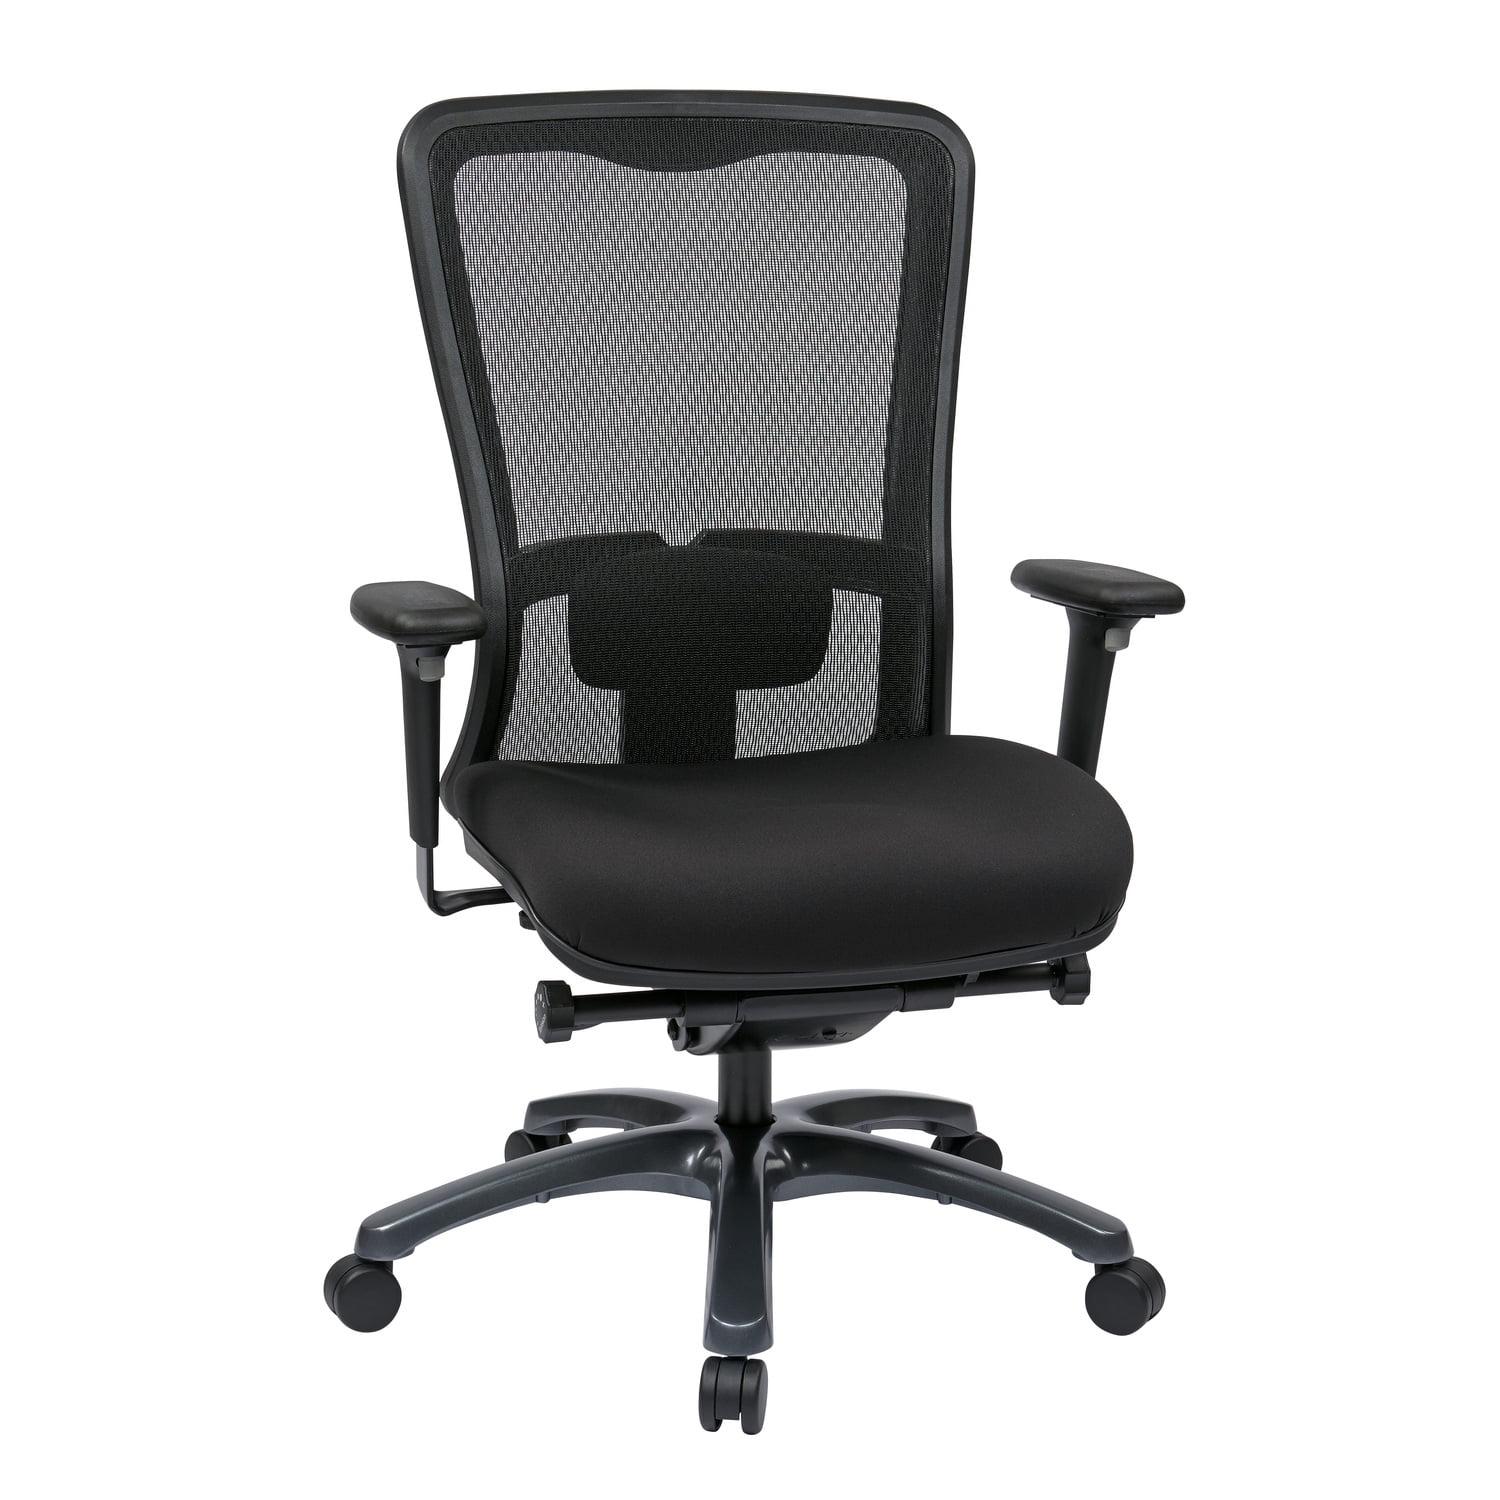 Black Ergonomic High Back Mesh Office Chair with Adjustable Arms